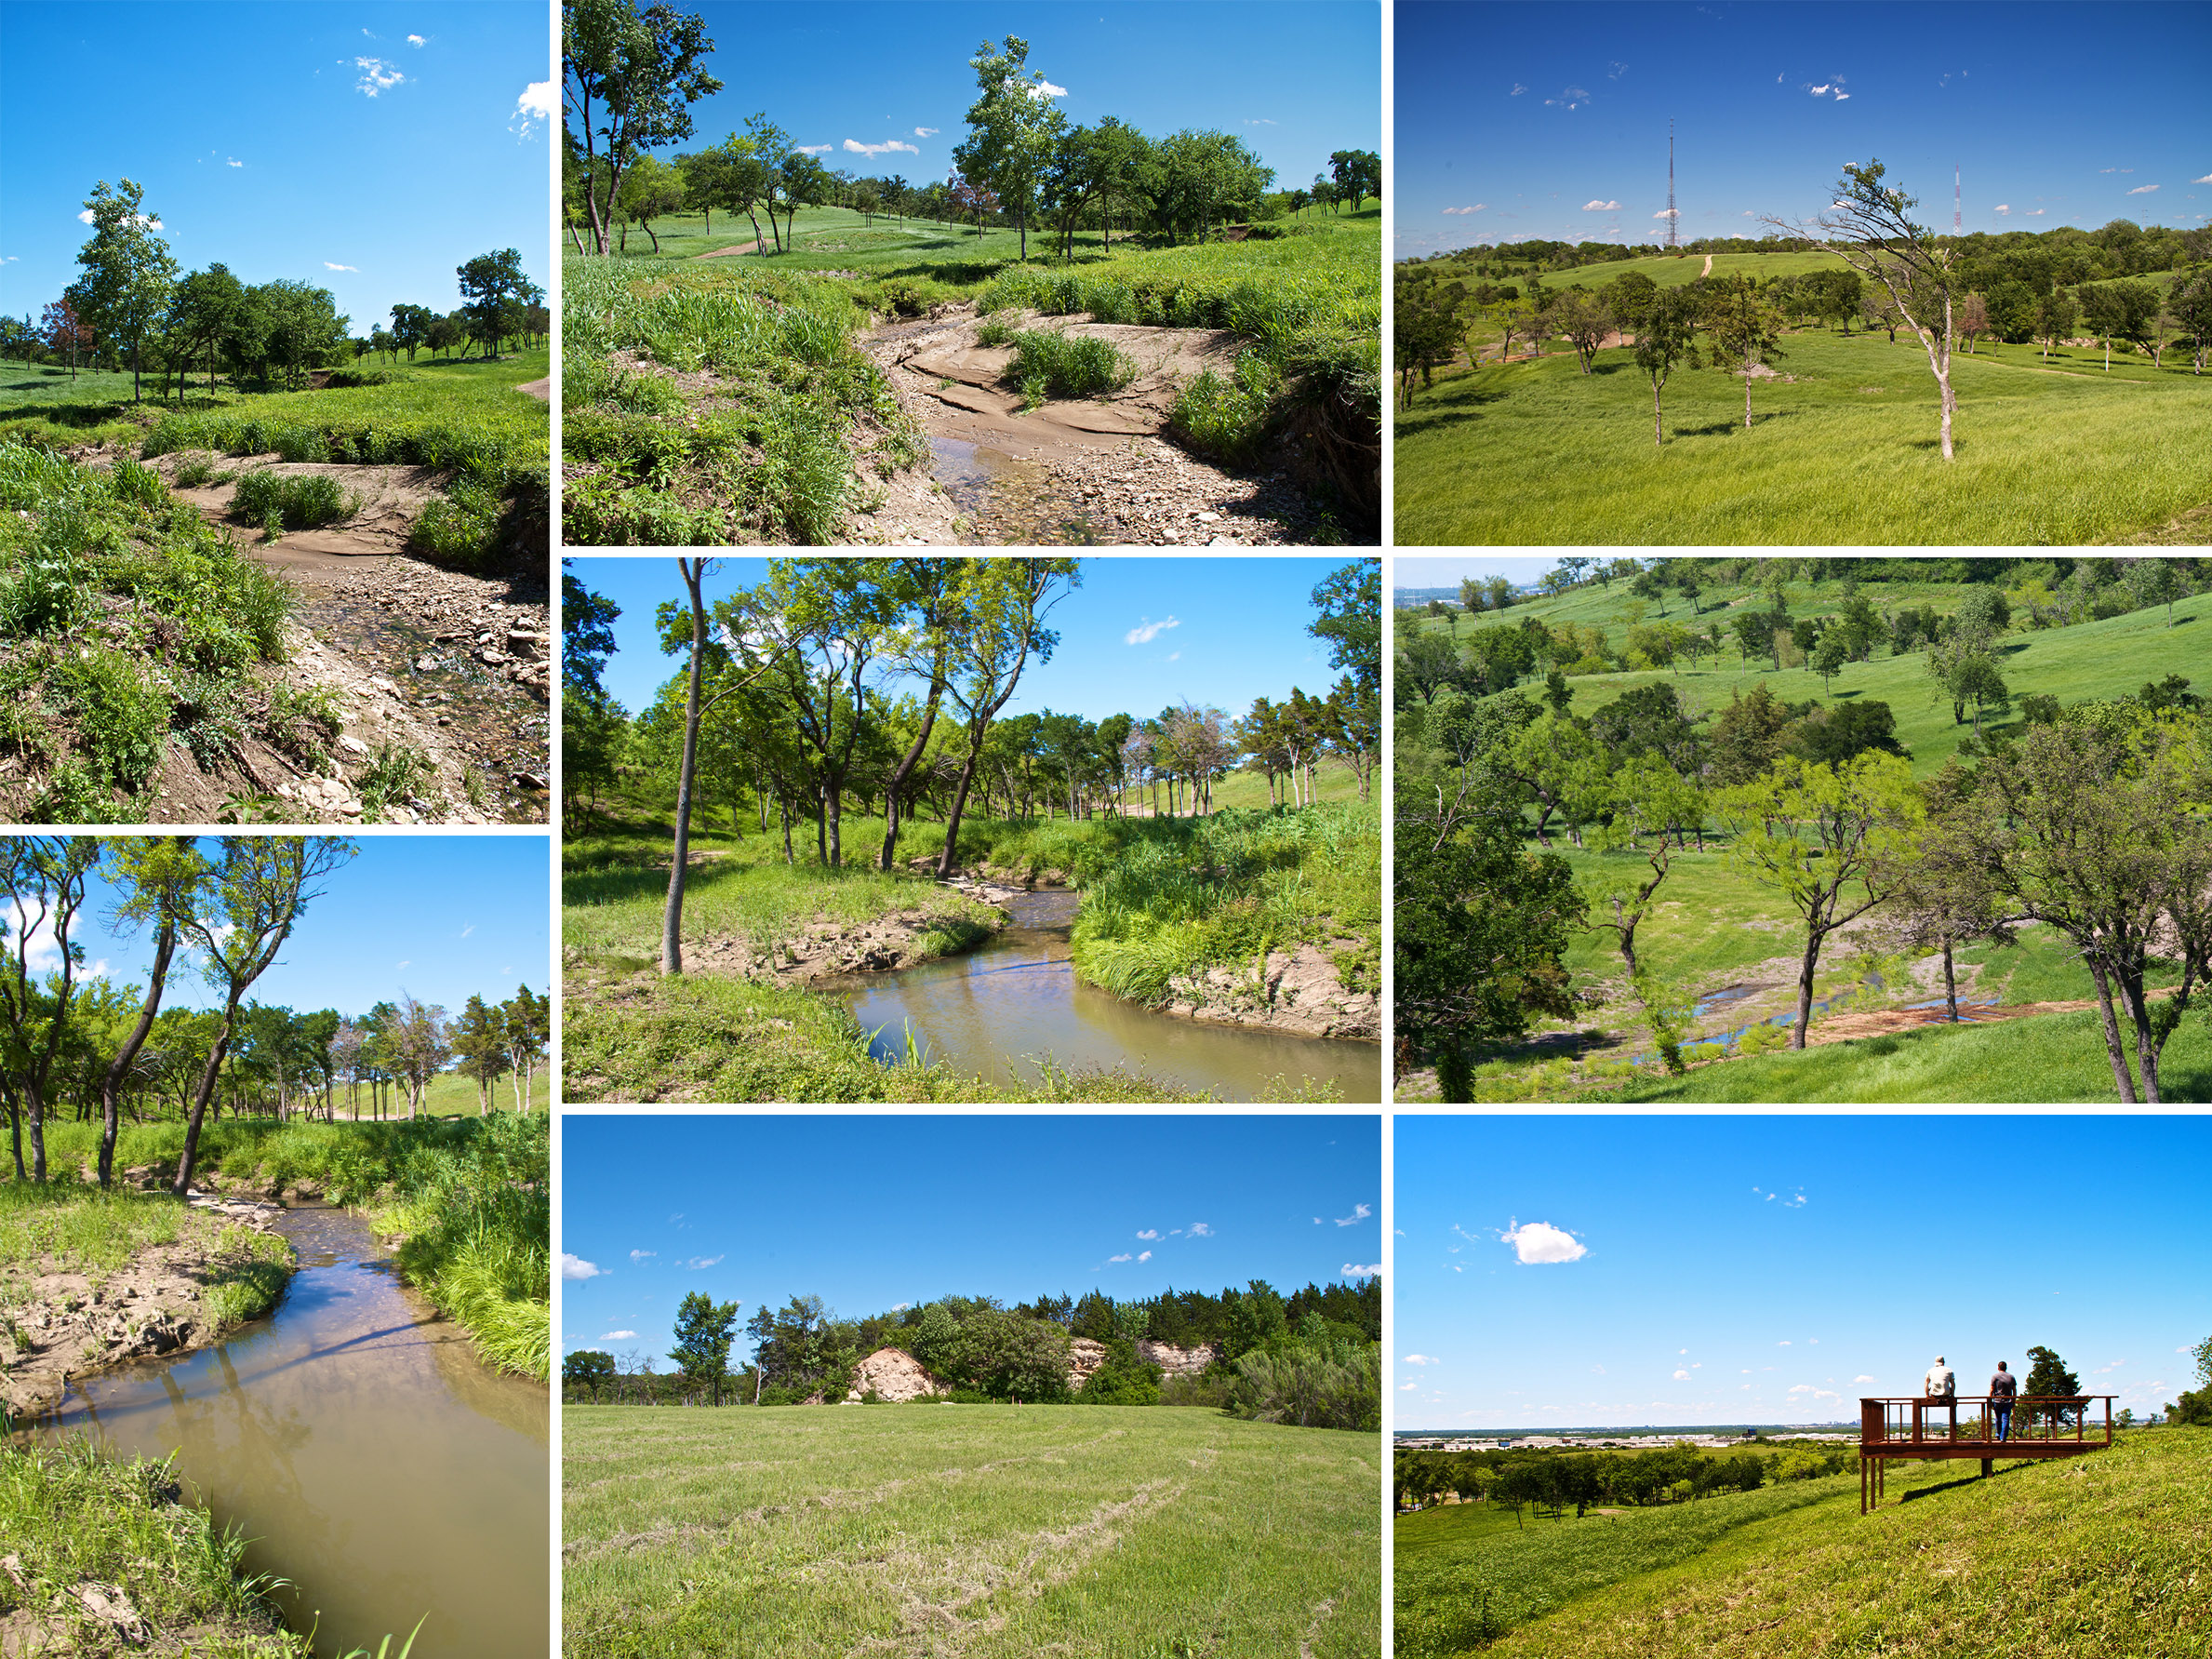 Collage of 8 photographs showcasing the existing site conditions of 'The Canyon' in Oak Cliff: undulating hills, shallow creeks, native grasses, trees, and natural elements.